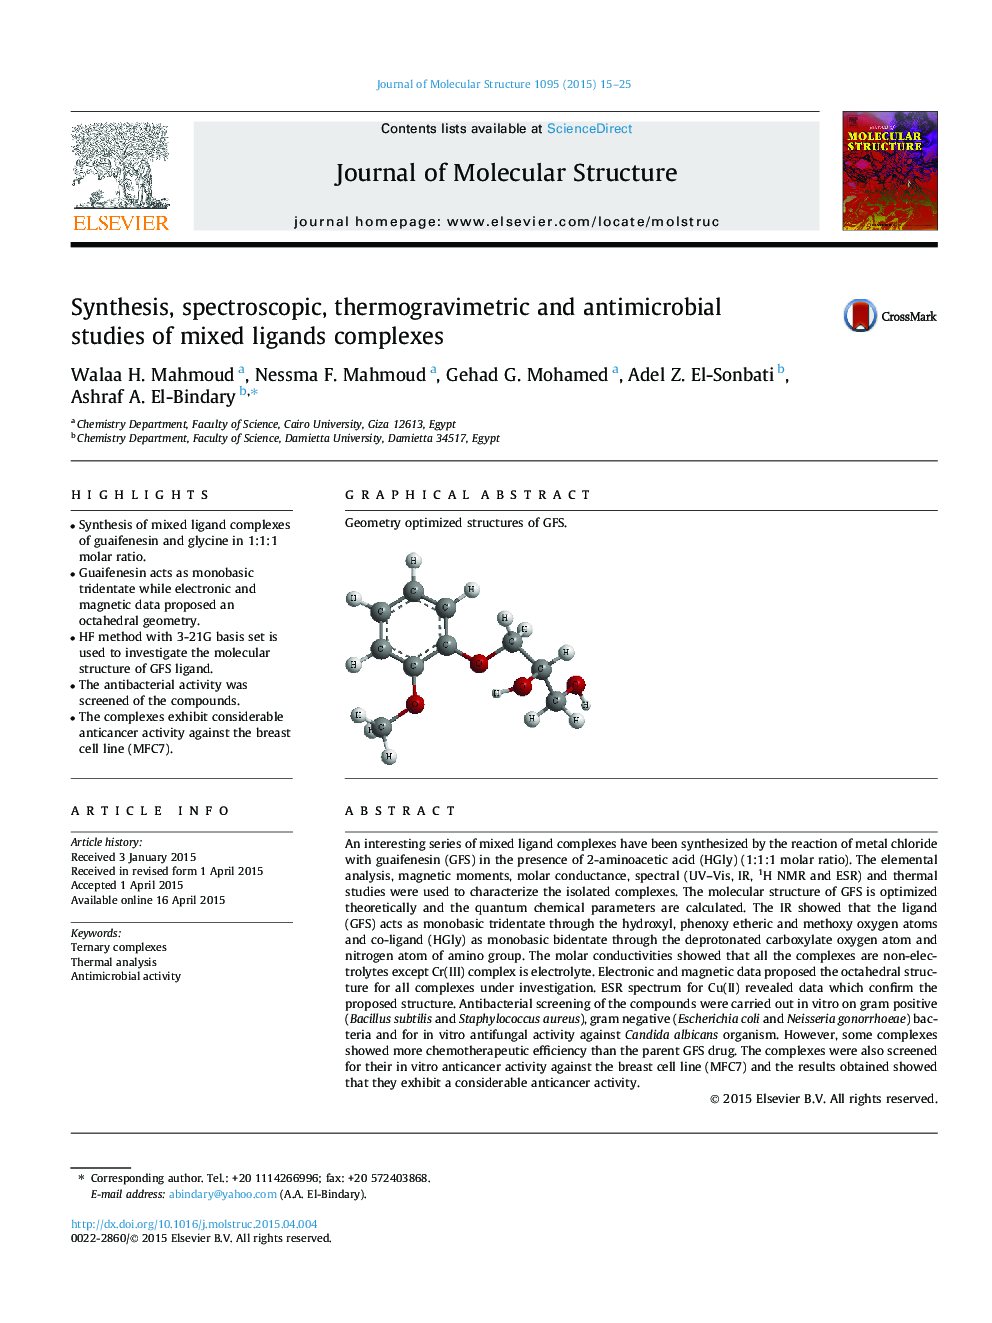 Synthesis, spectroscopic, thermogravimetric and antimicrobial studies of mixed ligands complexes